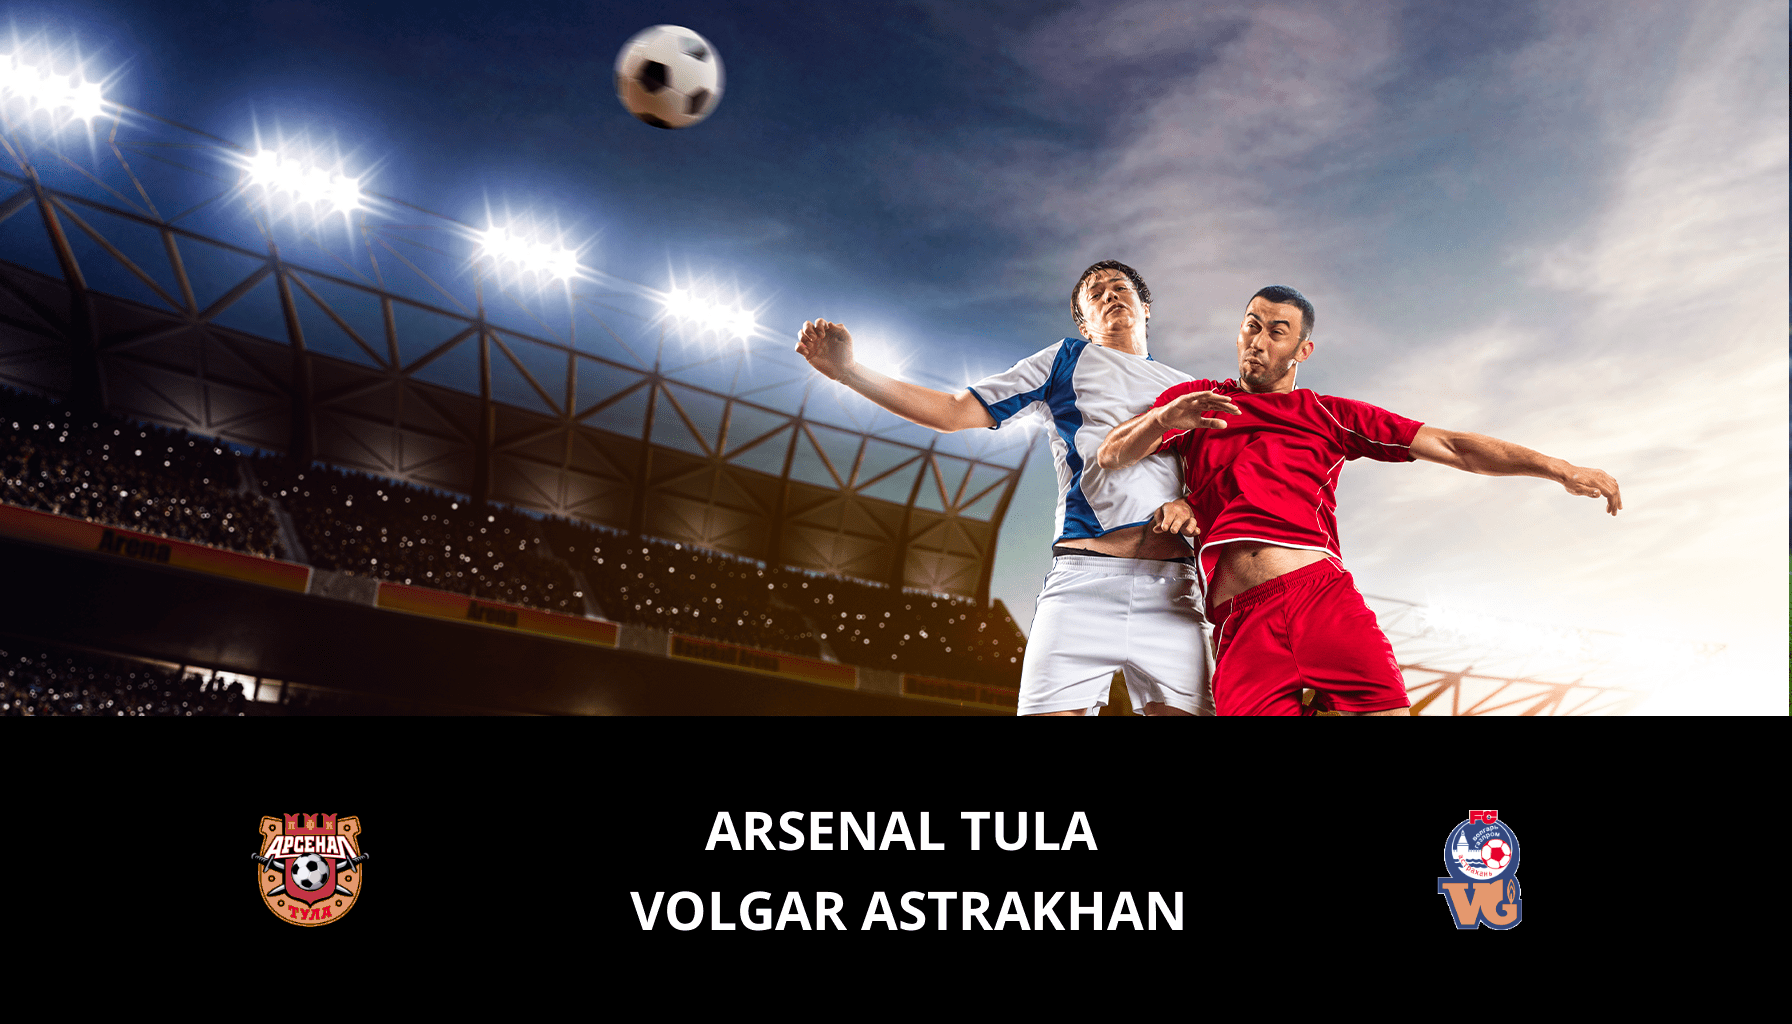 Previsione per Arsenal Tula VS Volgar Astrakhan il 18/03/2024 Analysis of the match